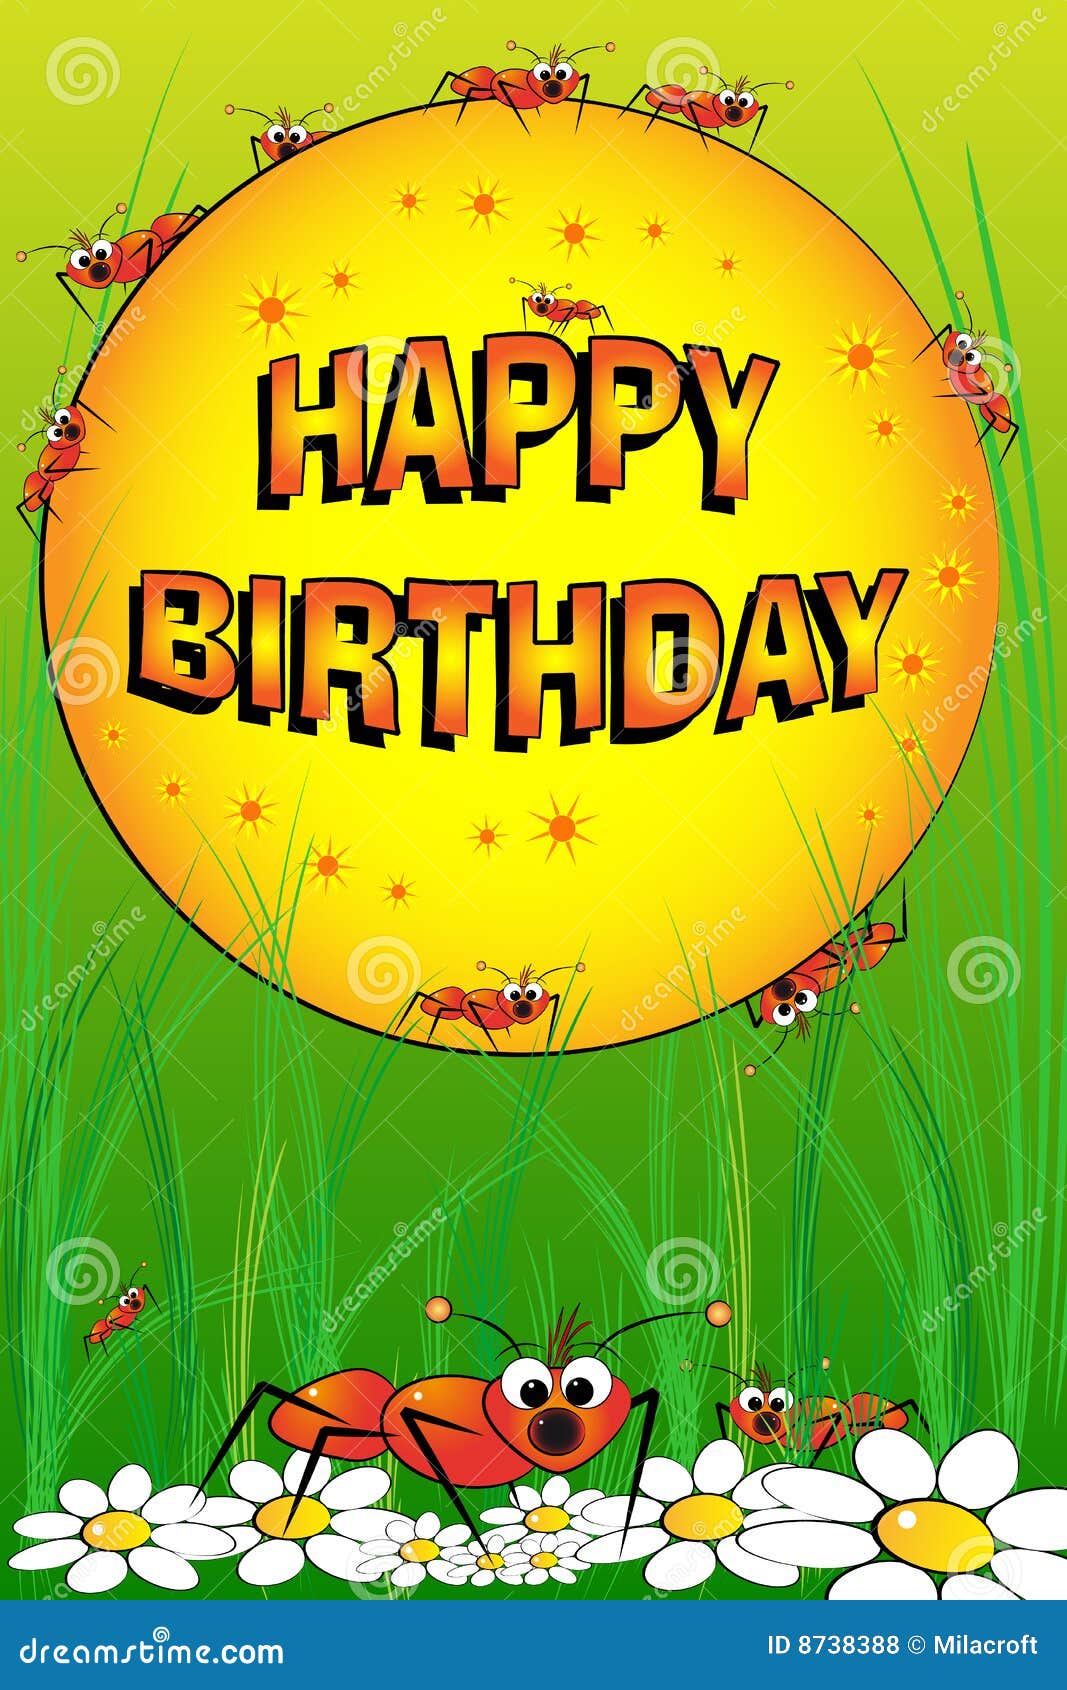 Ants, Flowers and Grass - Birthday Card Stock Vector - Illustration of ...